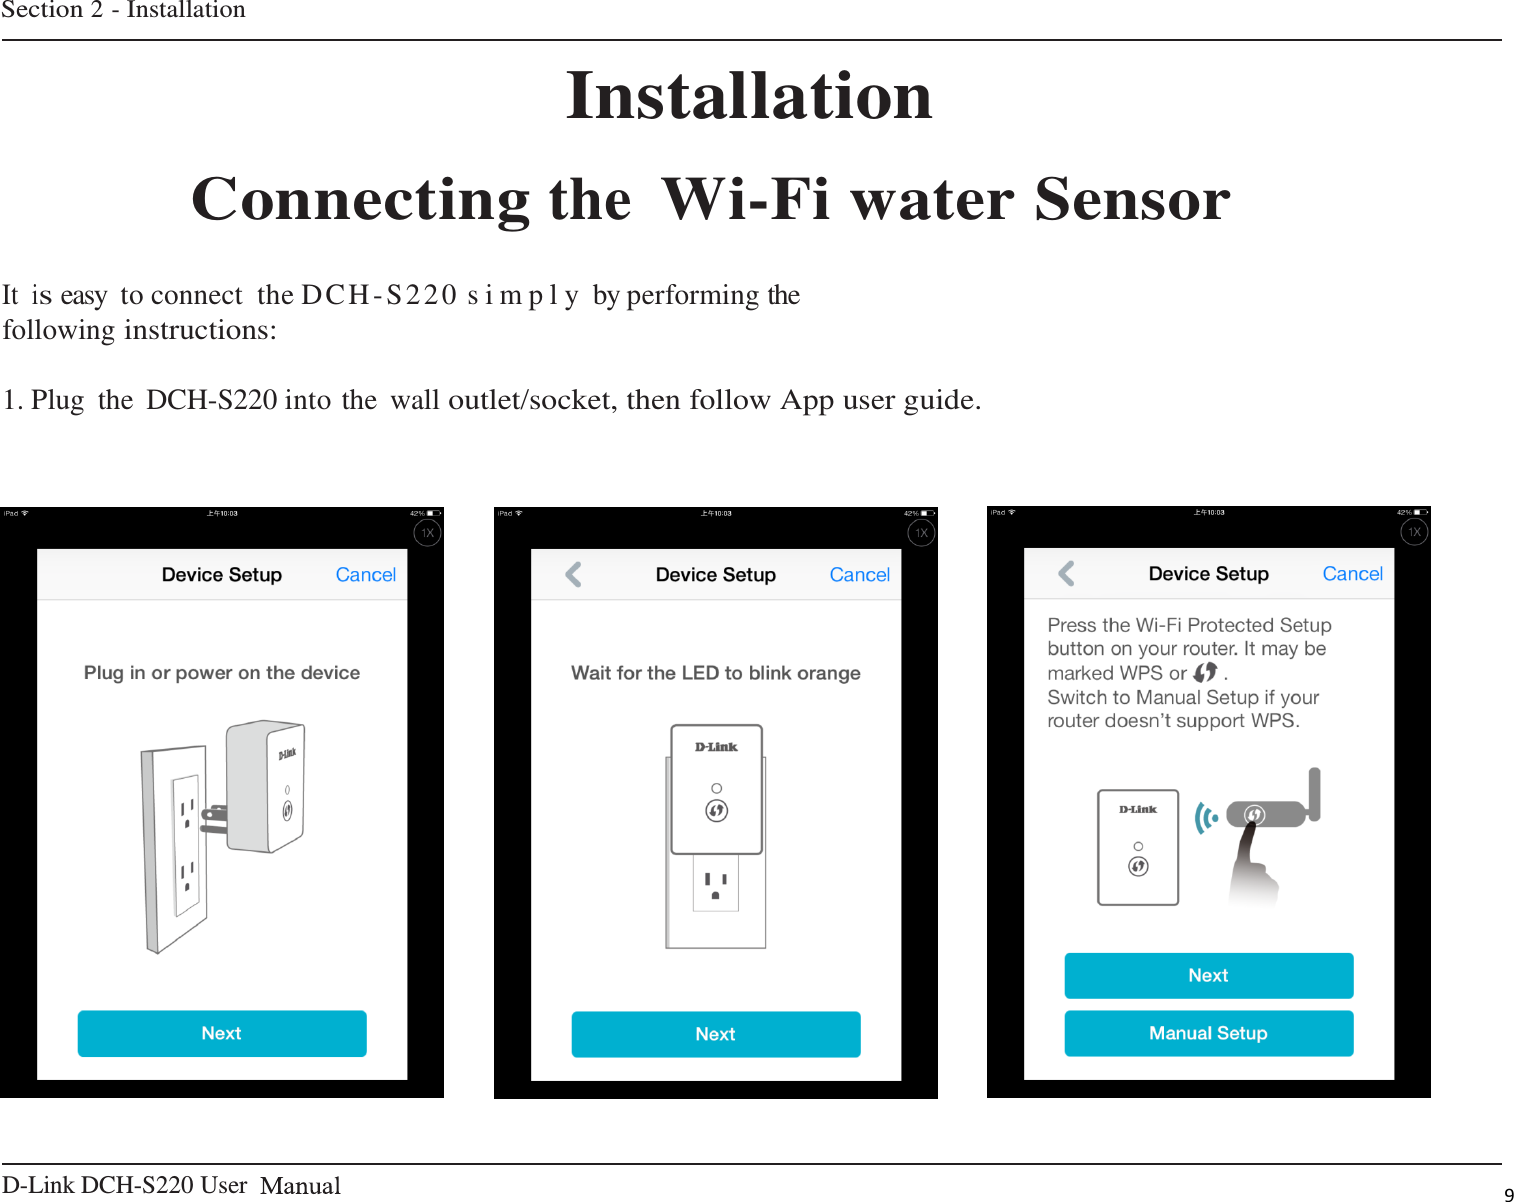 D-Link DCH-S220 User    9 Section 2 - Installation    Installation  Connecting the Wi-Fi water Sensor   It is easy to connect the DCH-S220 s i m p l y  by performing the following instructions:   1. Plug  the  DCH-S220 into the  wall outlet/socket, then follow App user guide.                                     